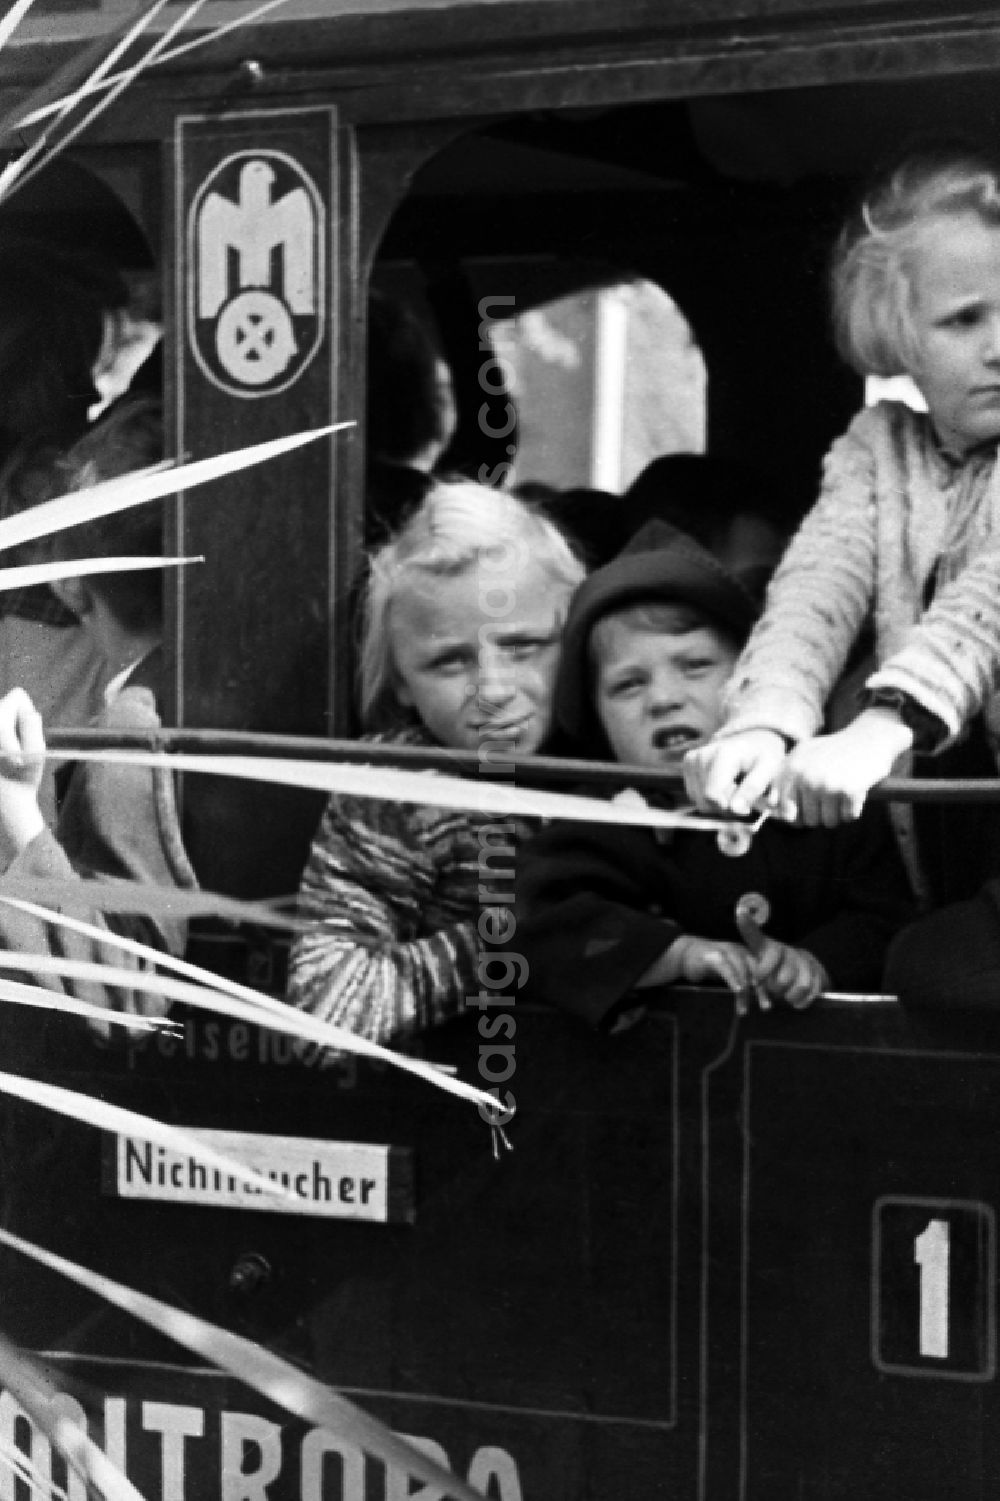 GDR image archive: Merseburg - Children in a train compartment in Merseburg in the federal state Saxony-Anhalt in Germany